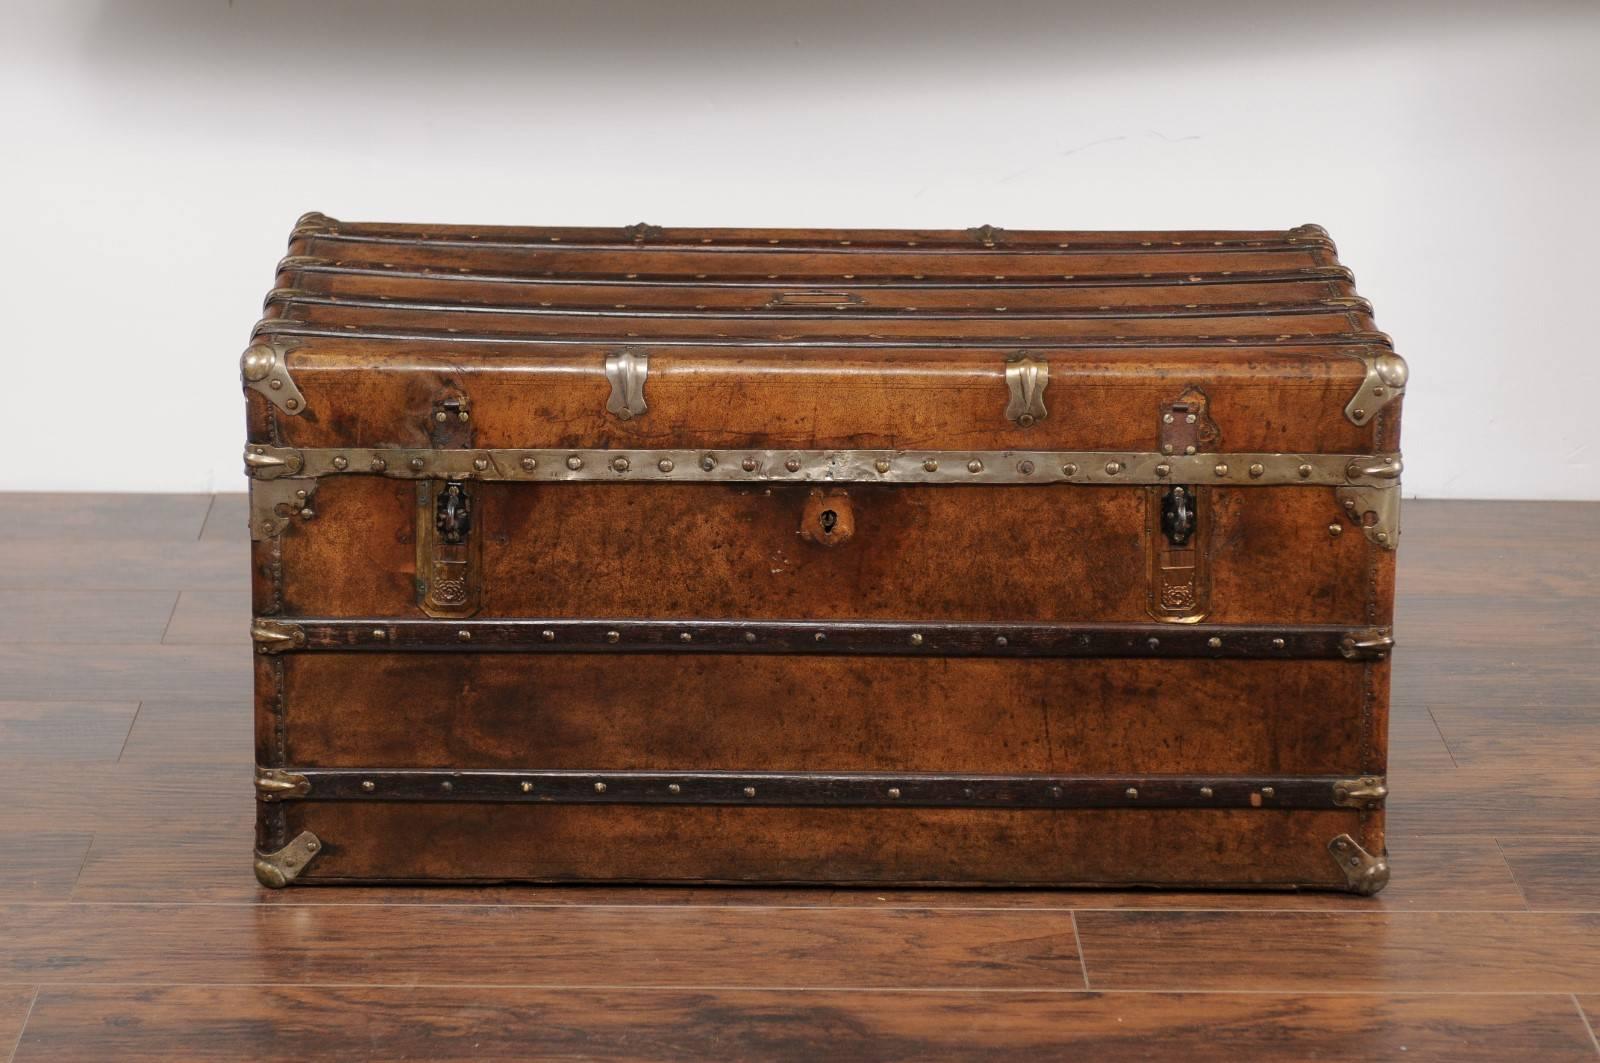 19th Century English Leather Trunk with Zinc Lined Interior and Brass Accents from the 1880s